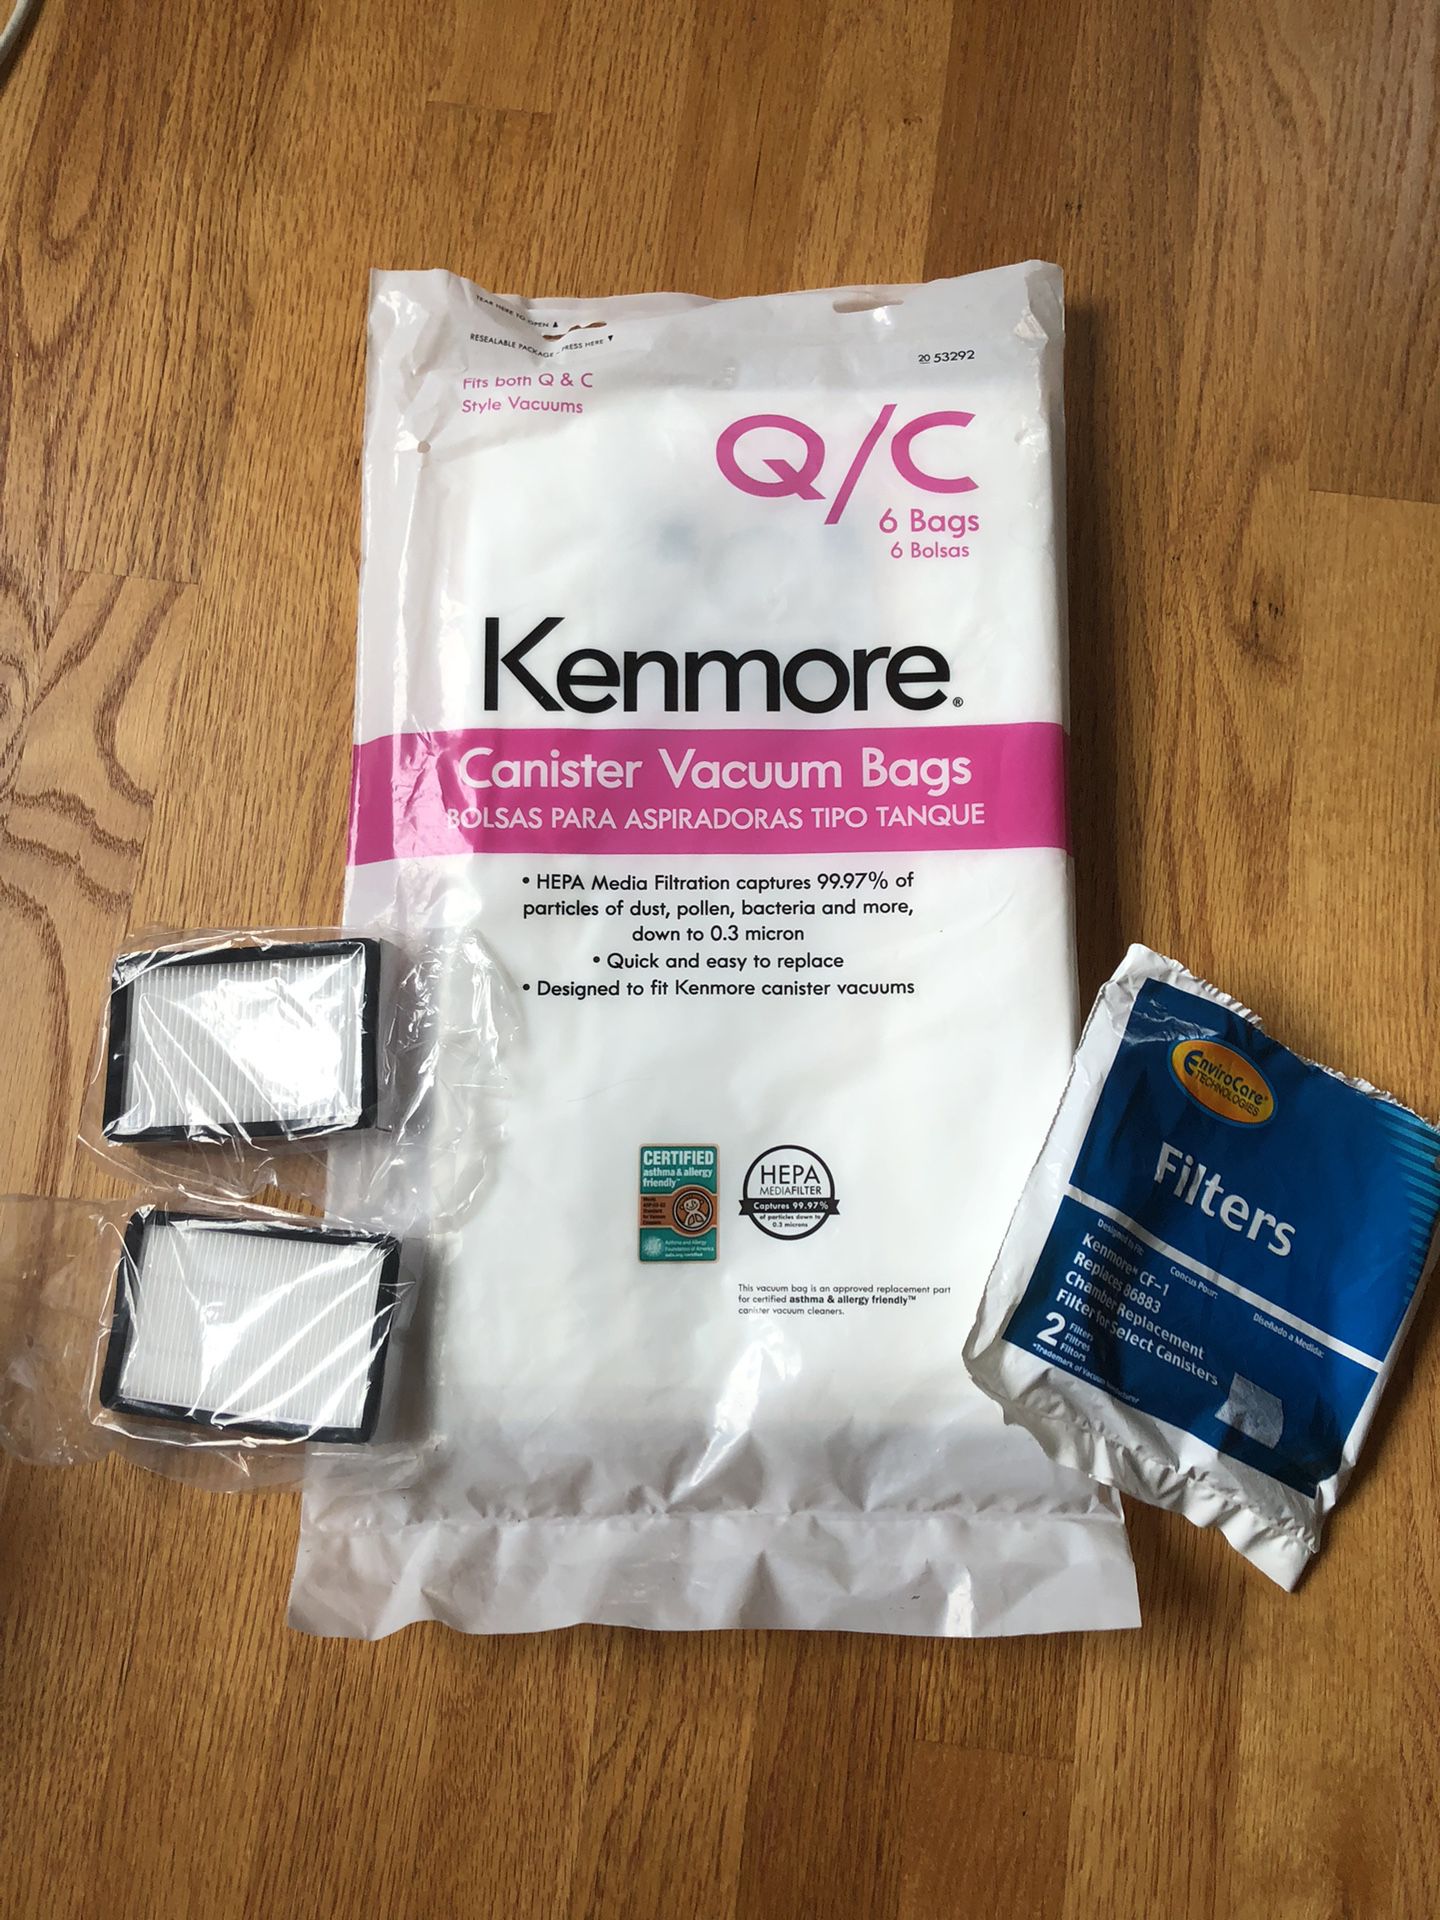 Kenmore Canister Vacuum Bags & Filters 